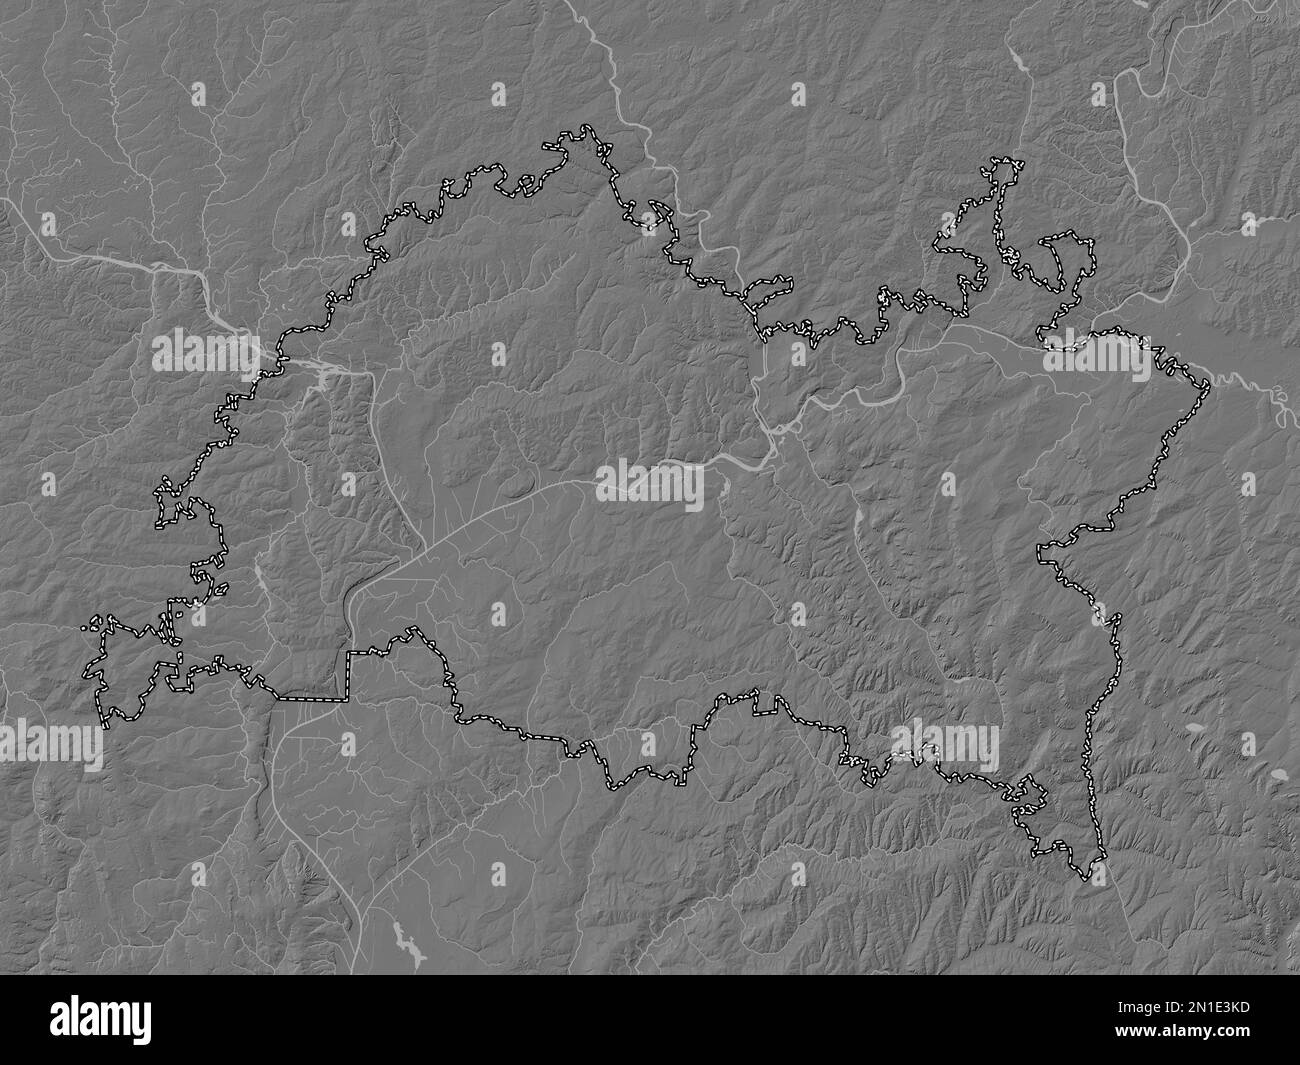 Tatarstan, republic of Russia. Bilevel elevation map with lakes and rivers Stock Photo